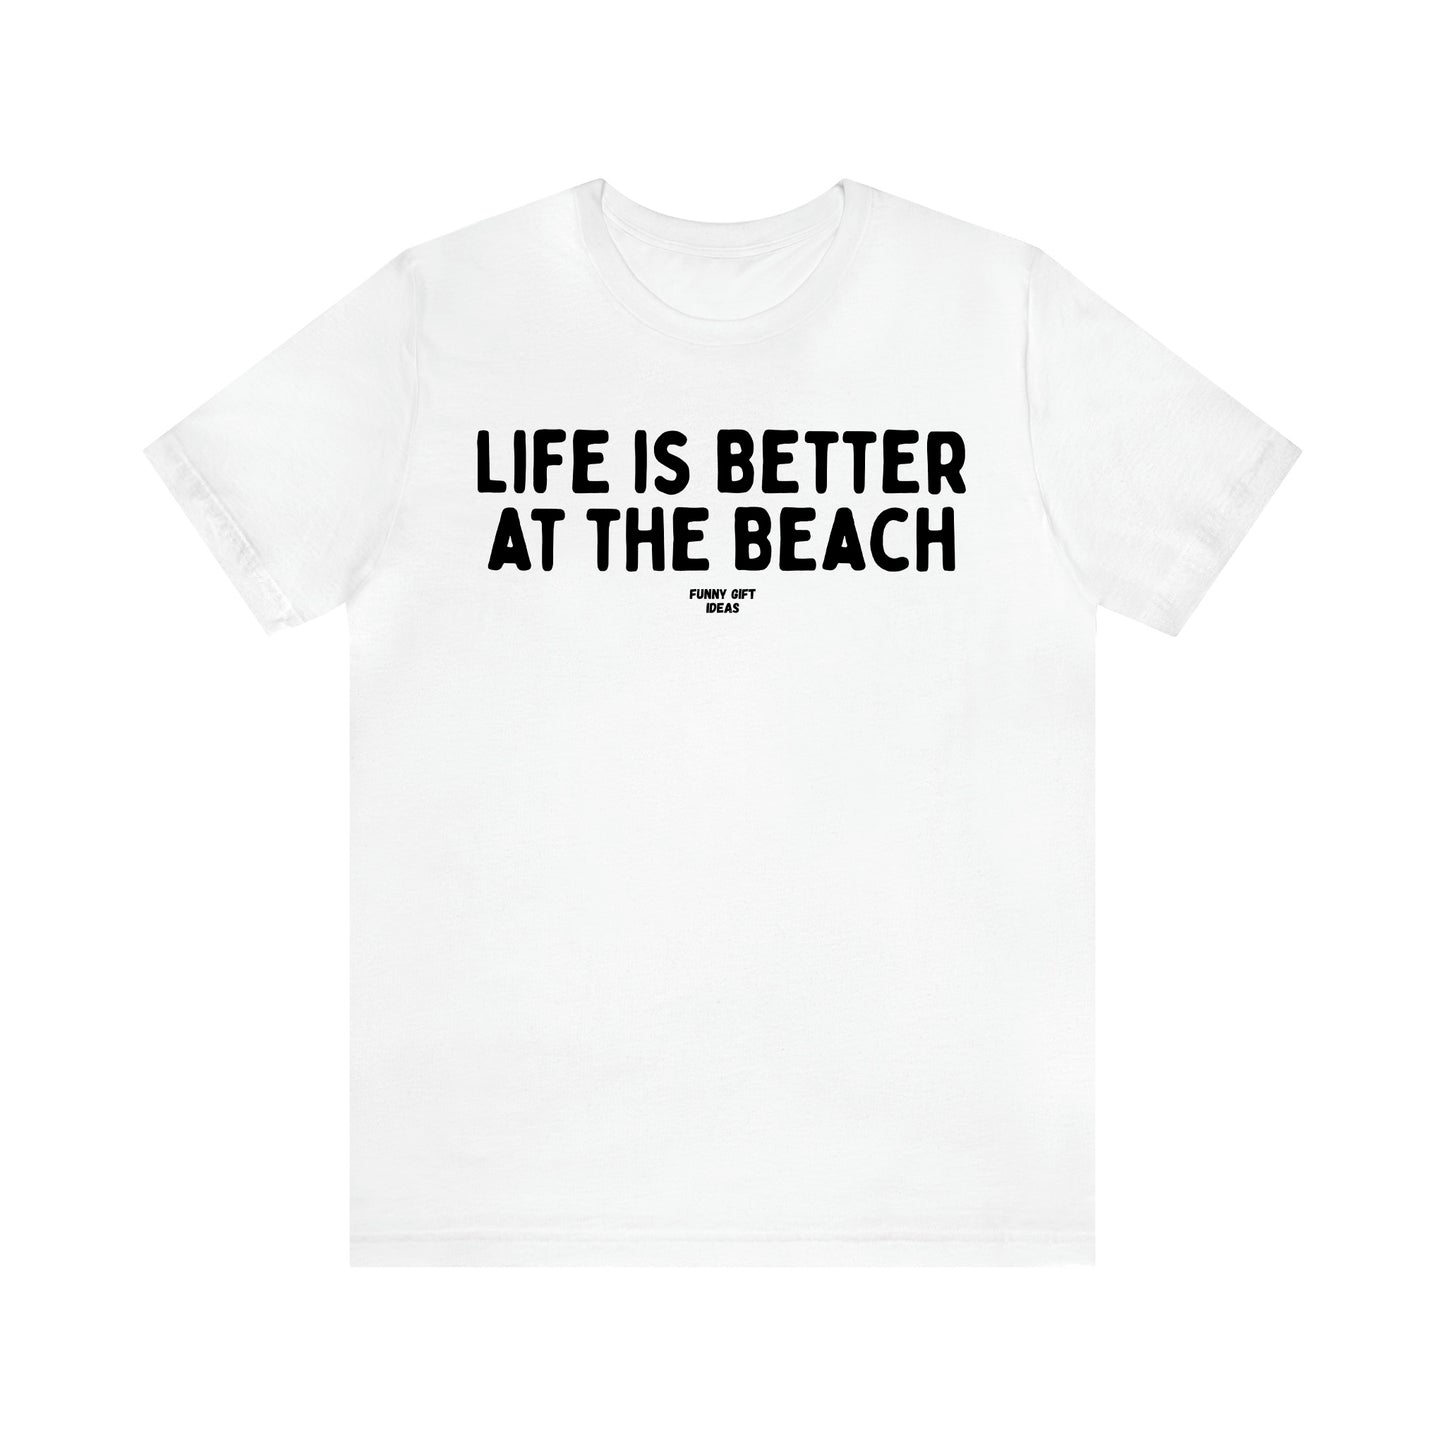 Women's T Shirts Life is Better at the Beach - Funny Gift Ideas